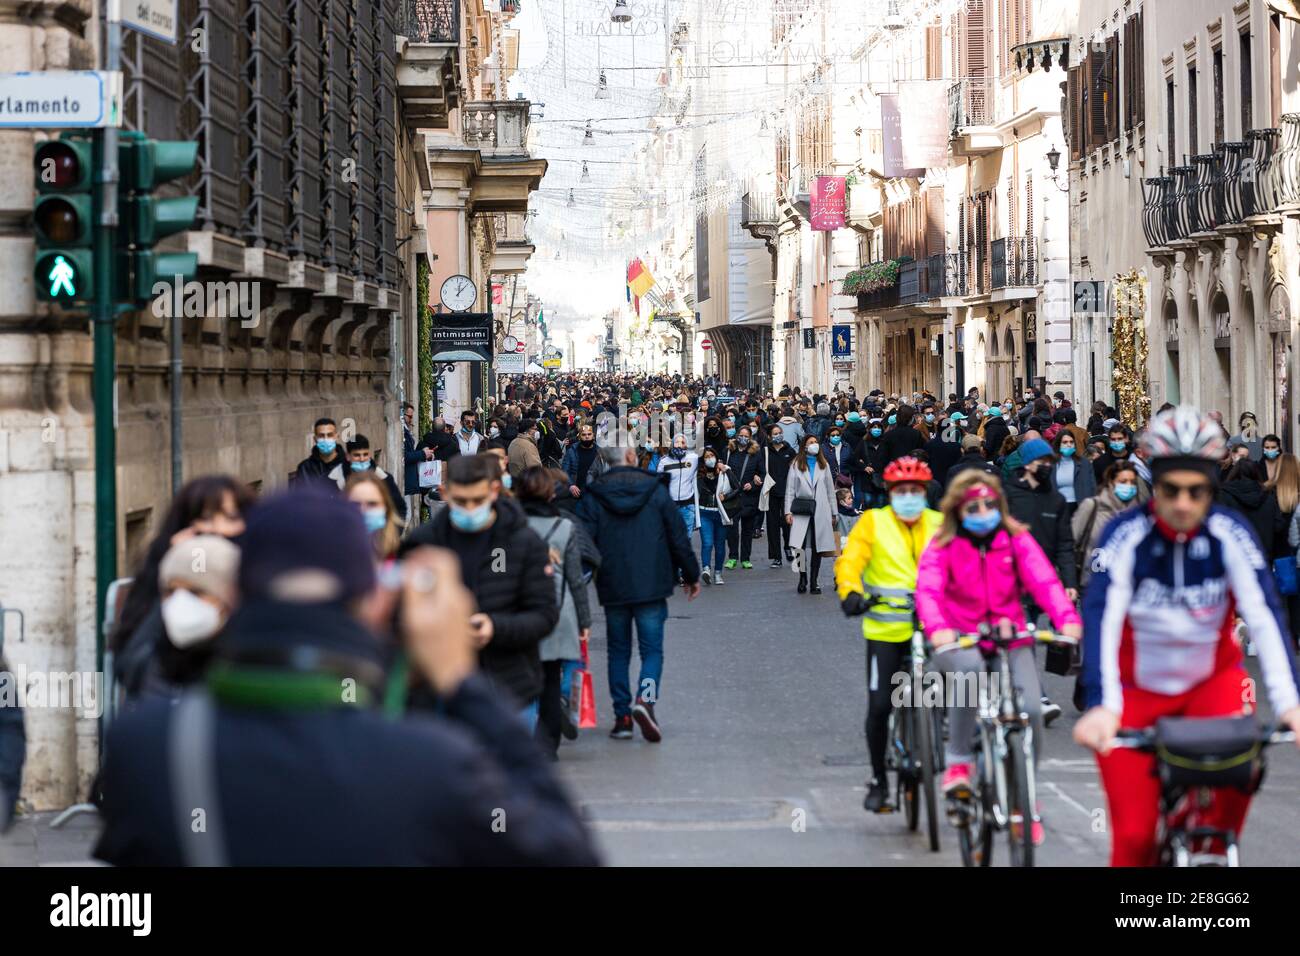 Photo taken in Rome in Via del Corso during the restrictions on crowding of people due to Covid-19 Stock Photo